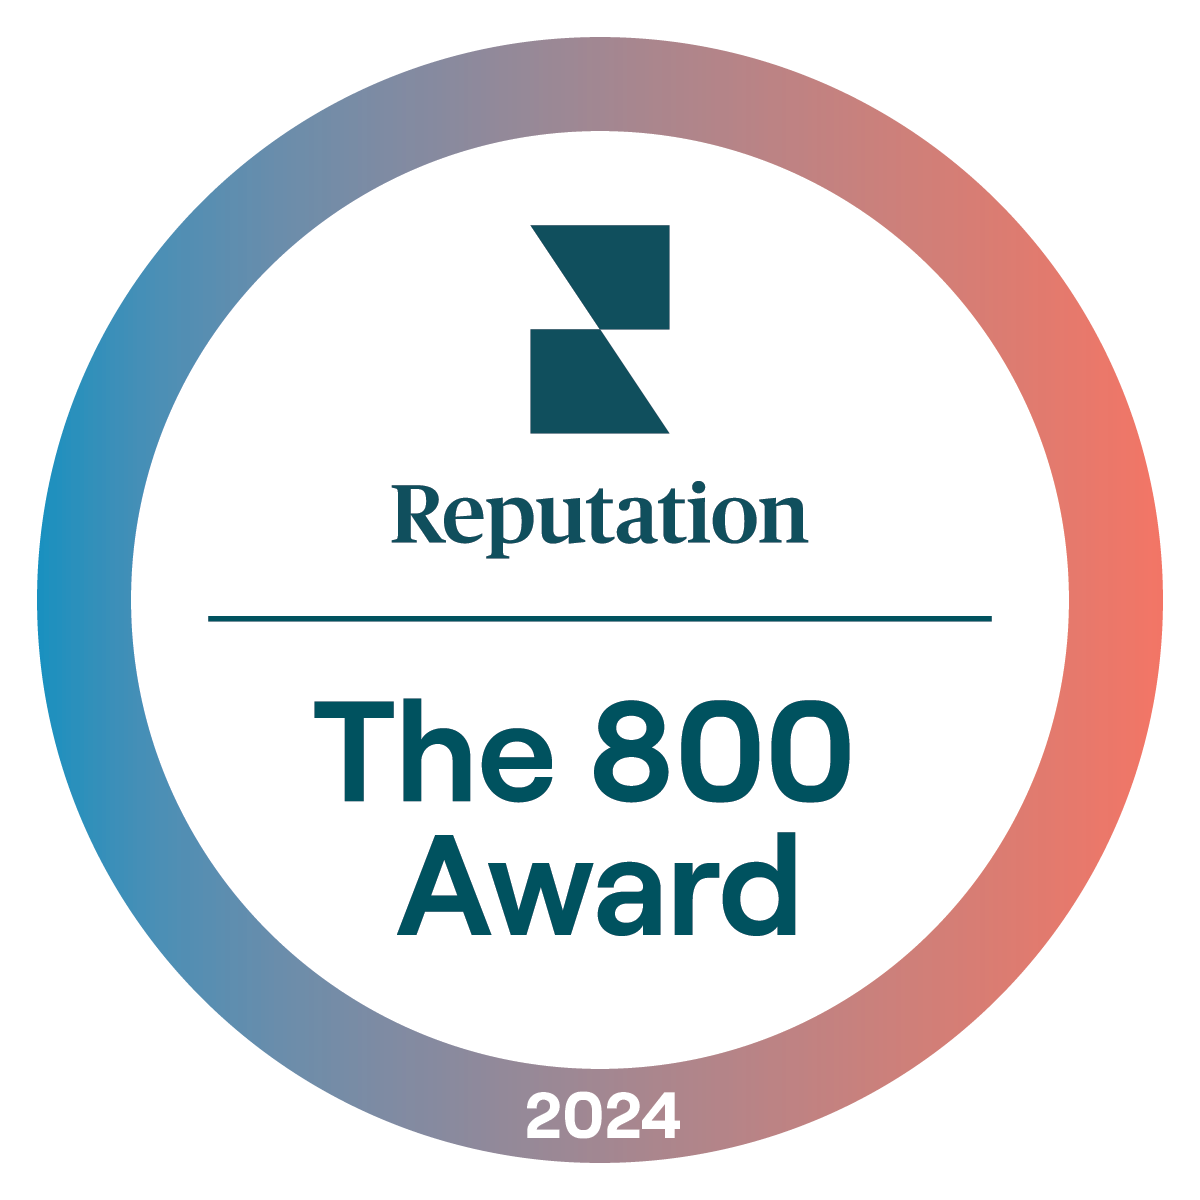 The 800 Award 2024 from Reputation